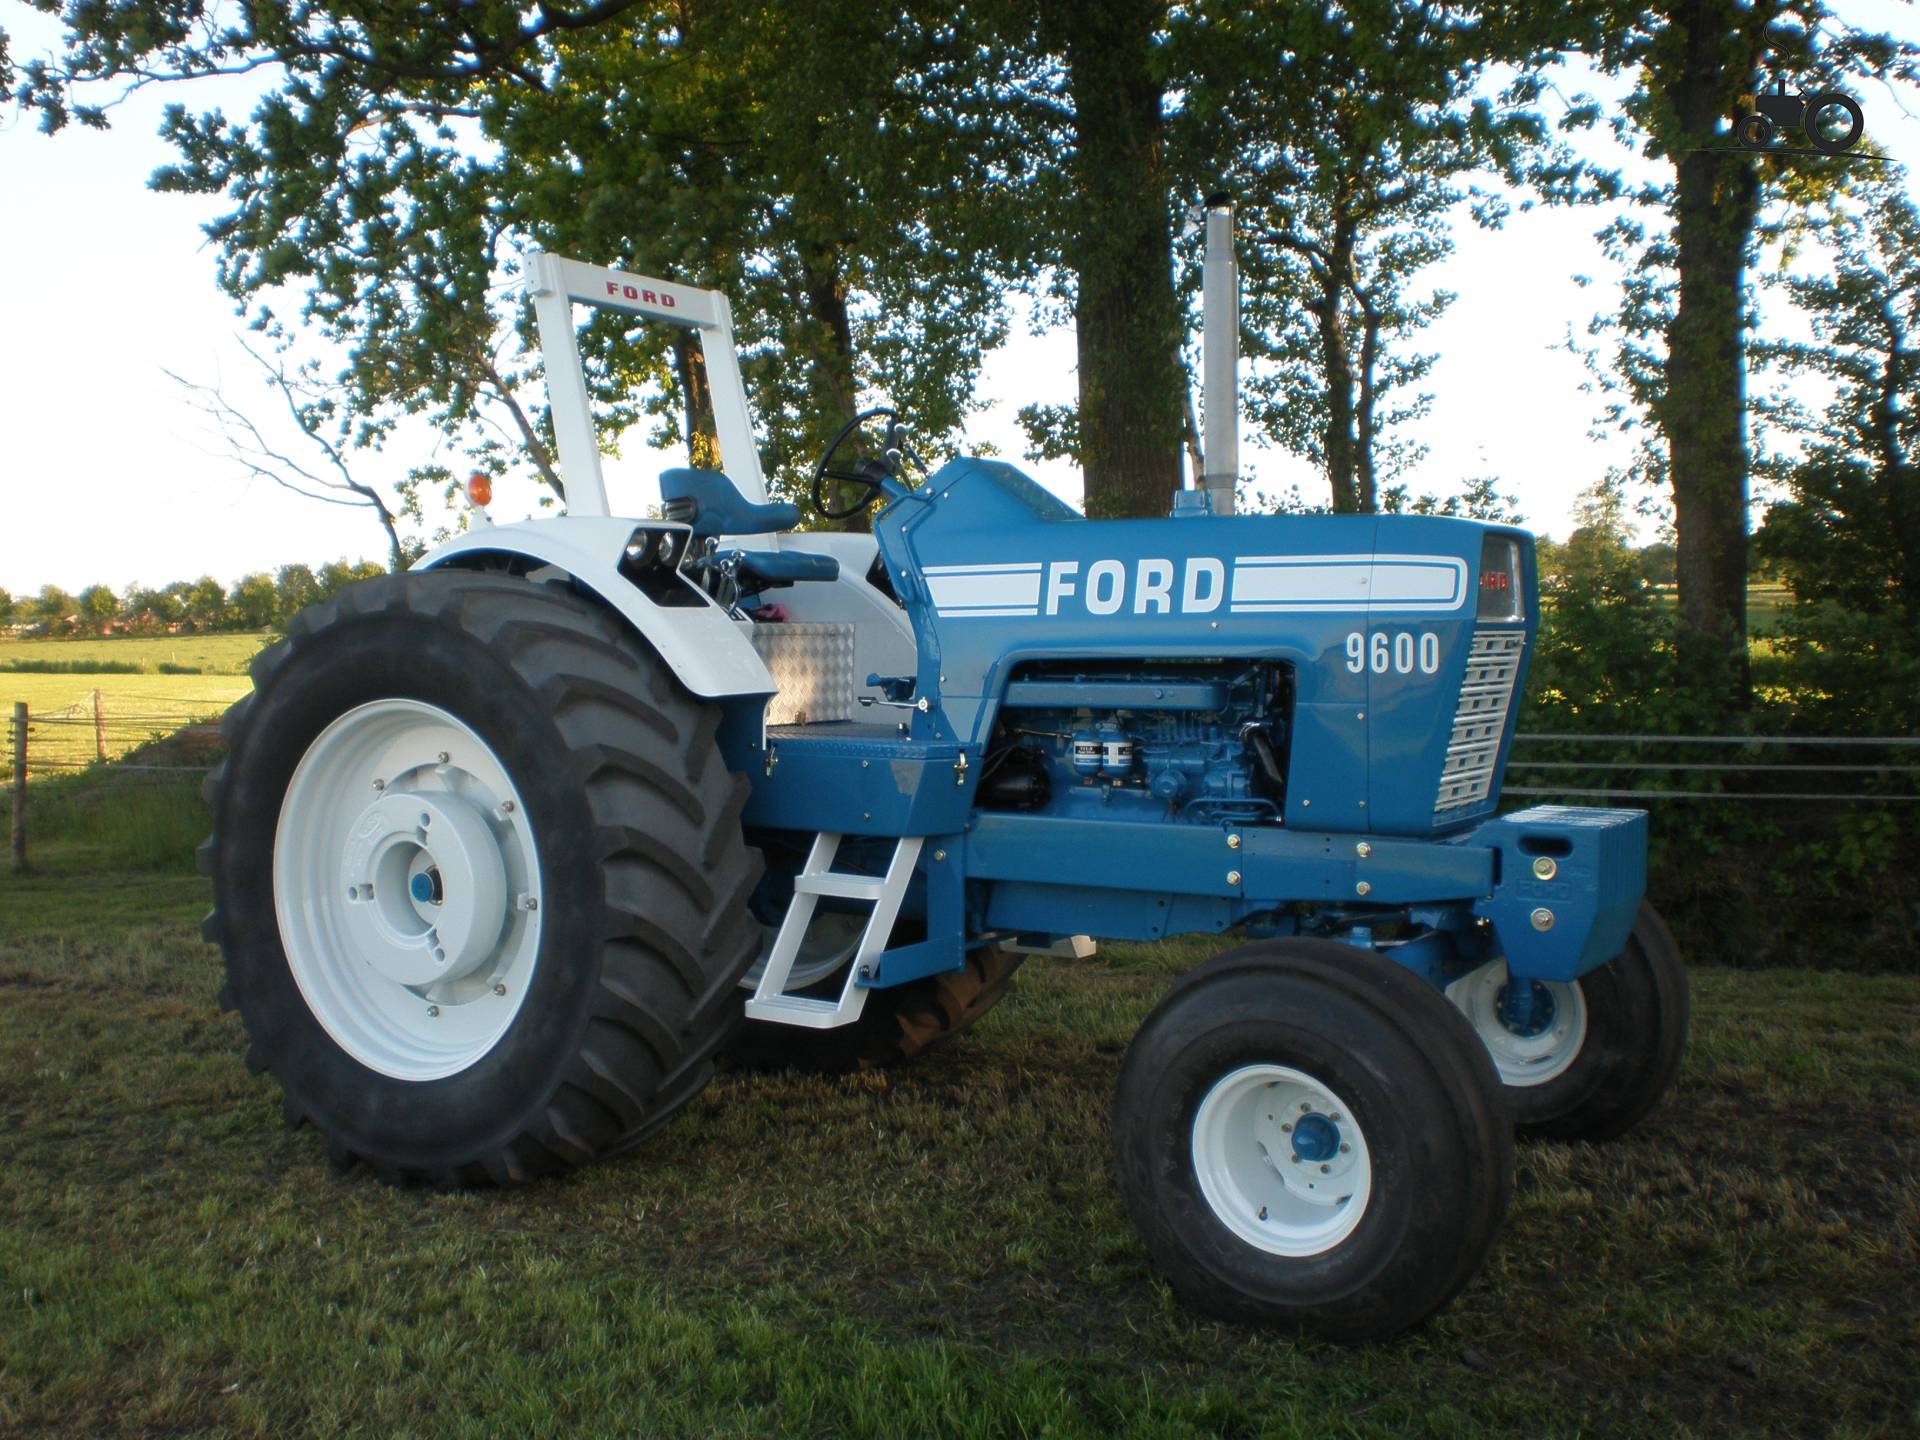 Ford 9600 Specs and data - Everything about the Ford 9600